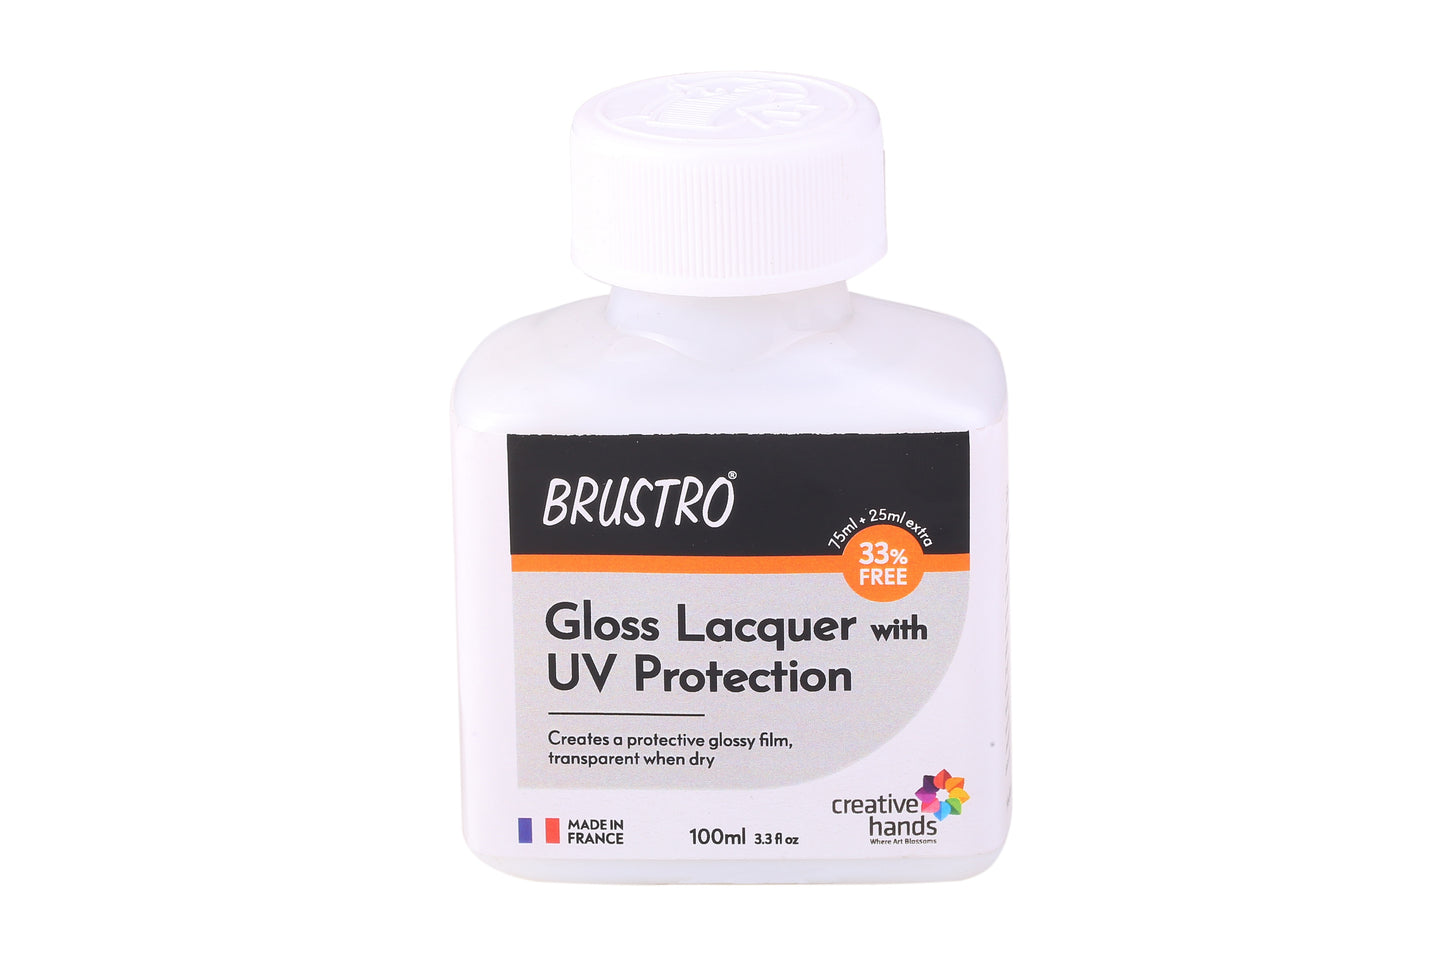 Brustro Professional Gloss Lacquer with UV Protection 100ml (75ml + 25ml Free)